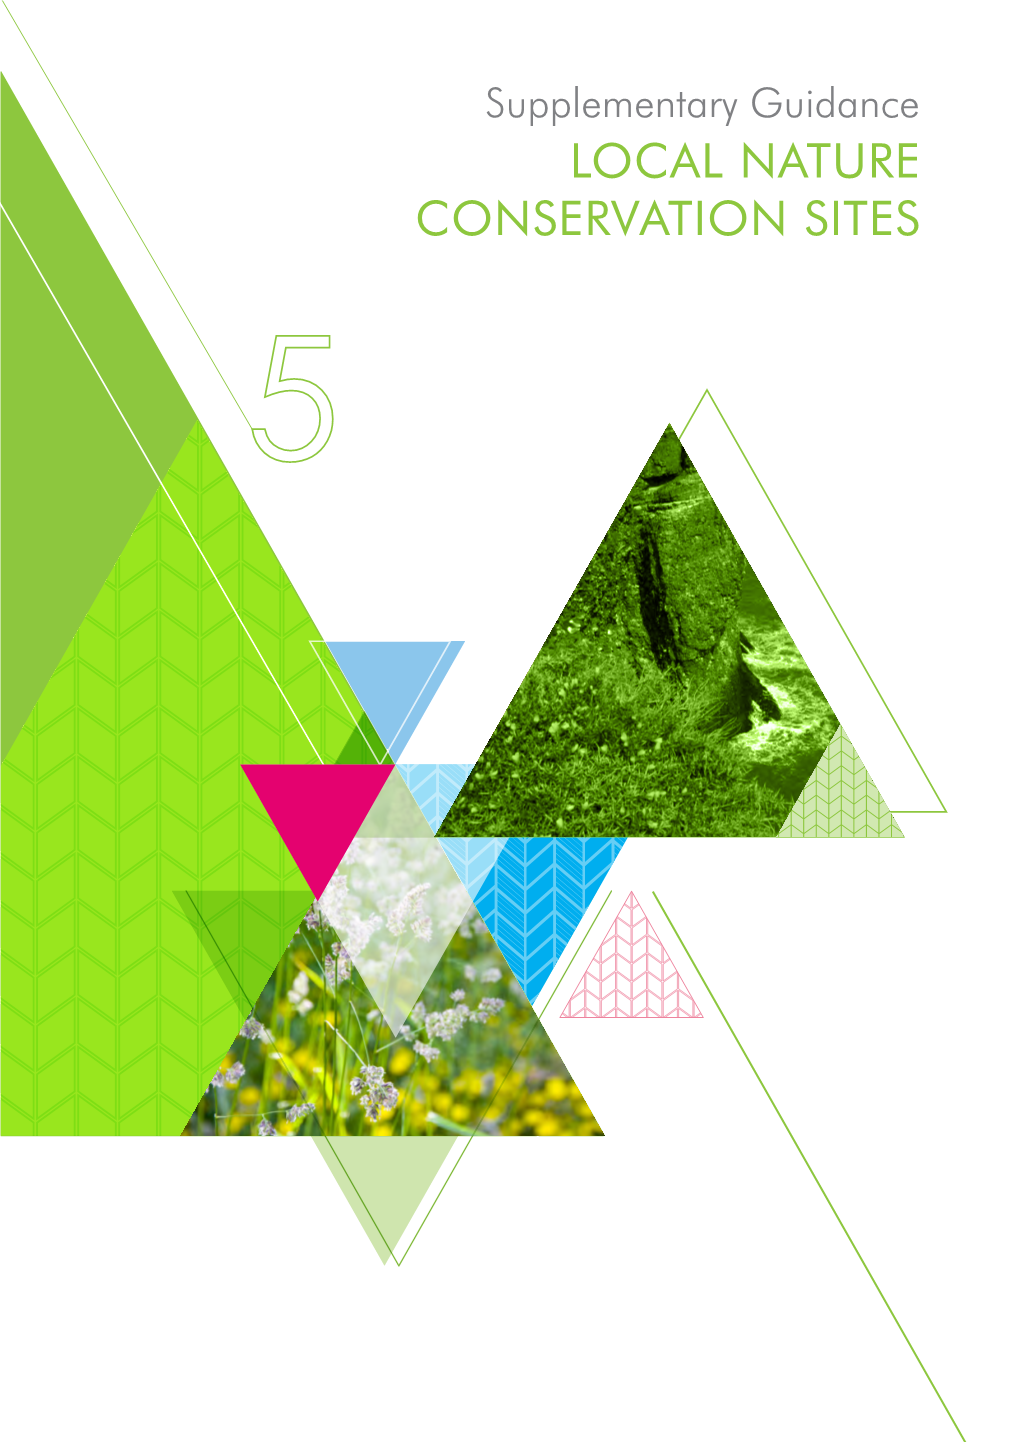 LOCAL NATURE CONSERVATION SITES Supplementary Guidance